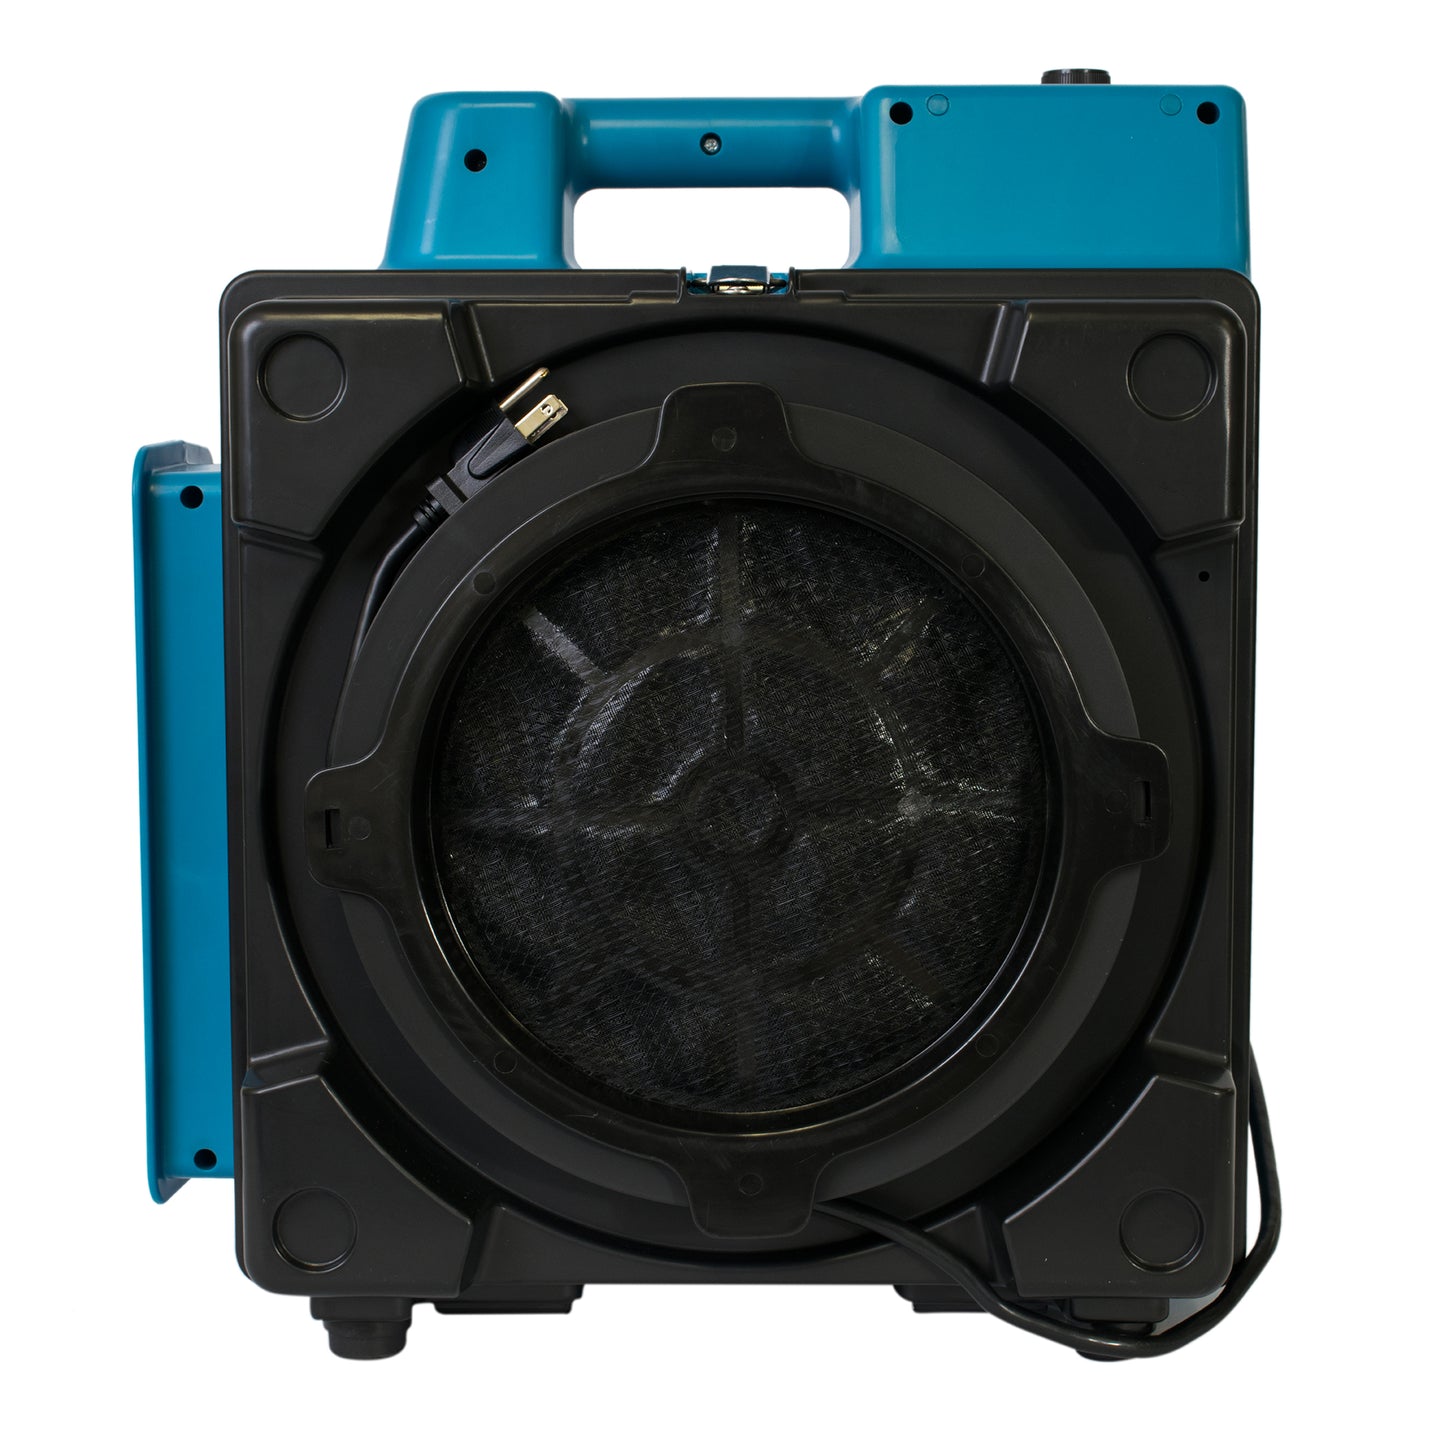 X-2580 Mini Air Scrubber, 4-Stage Filtration incl. Carbon / HEPA Filters, 1/2 HP, 550 CFM